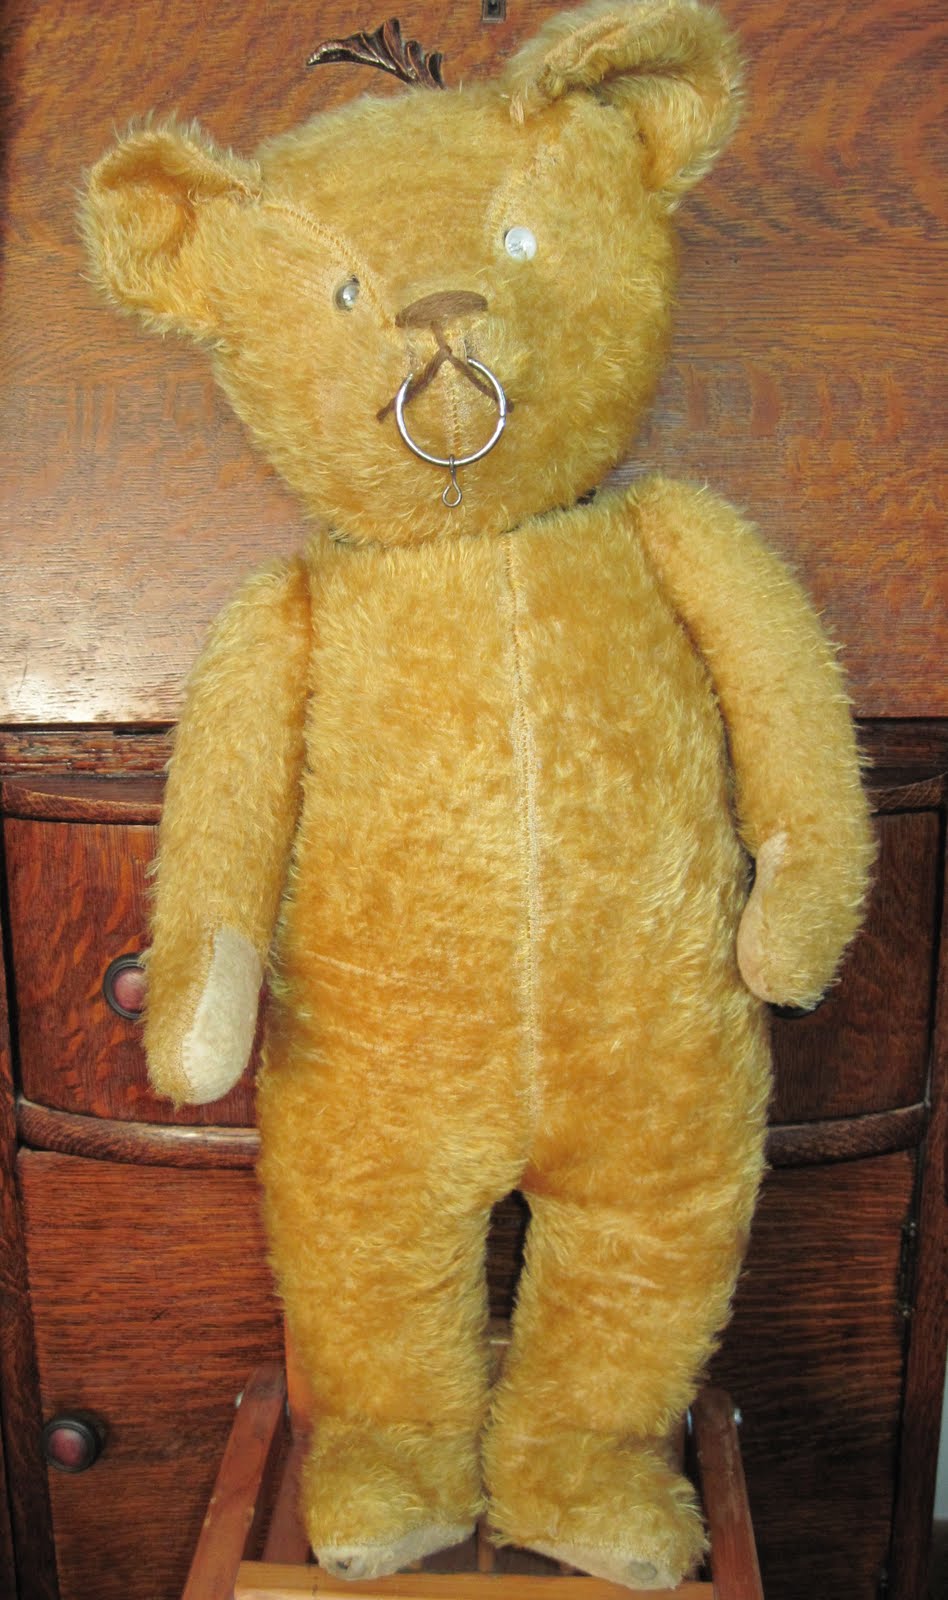 Tracy's Toys (and Some Other Stuff): Antique Electric Eye Circus Bear